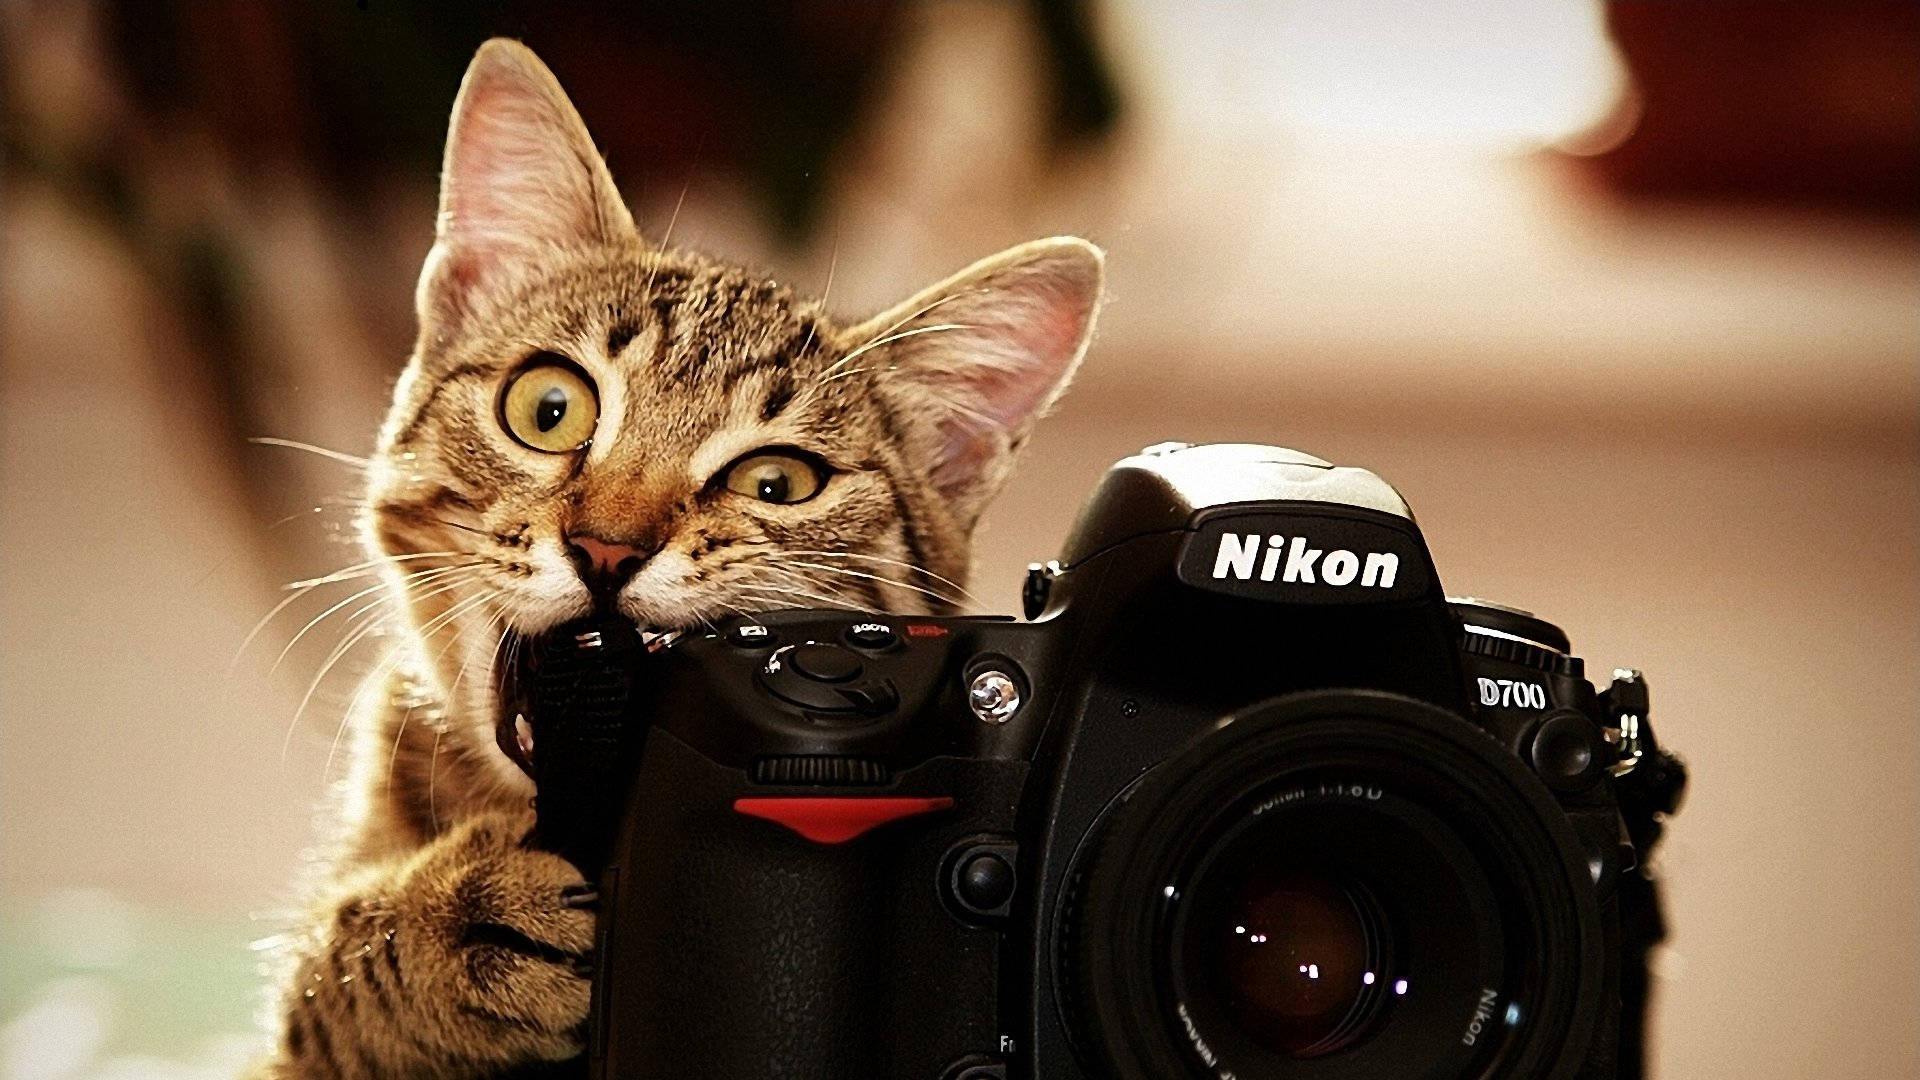 A Curious Tabby Cat With A Nikon Camera. Background